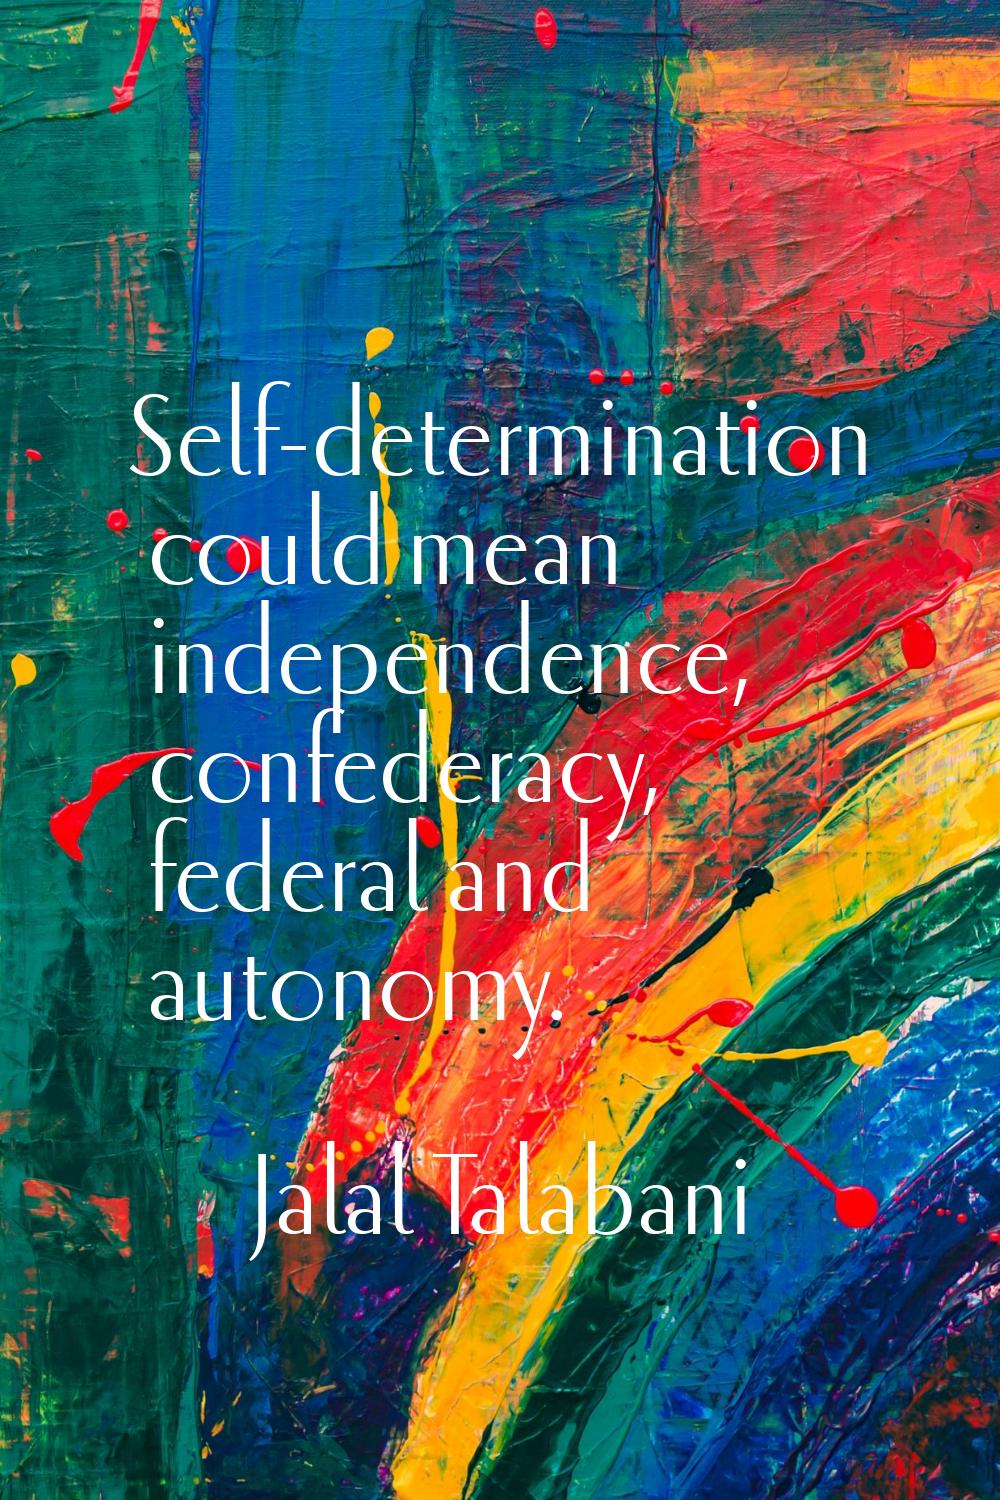 Self-determination could mean independence, confederacy, federal and autonomy.